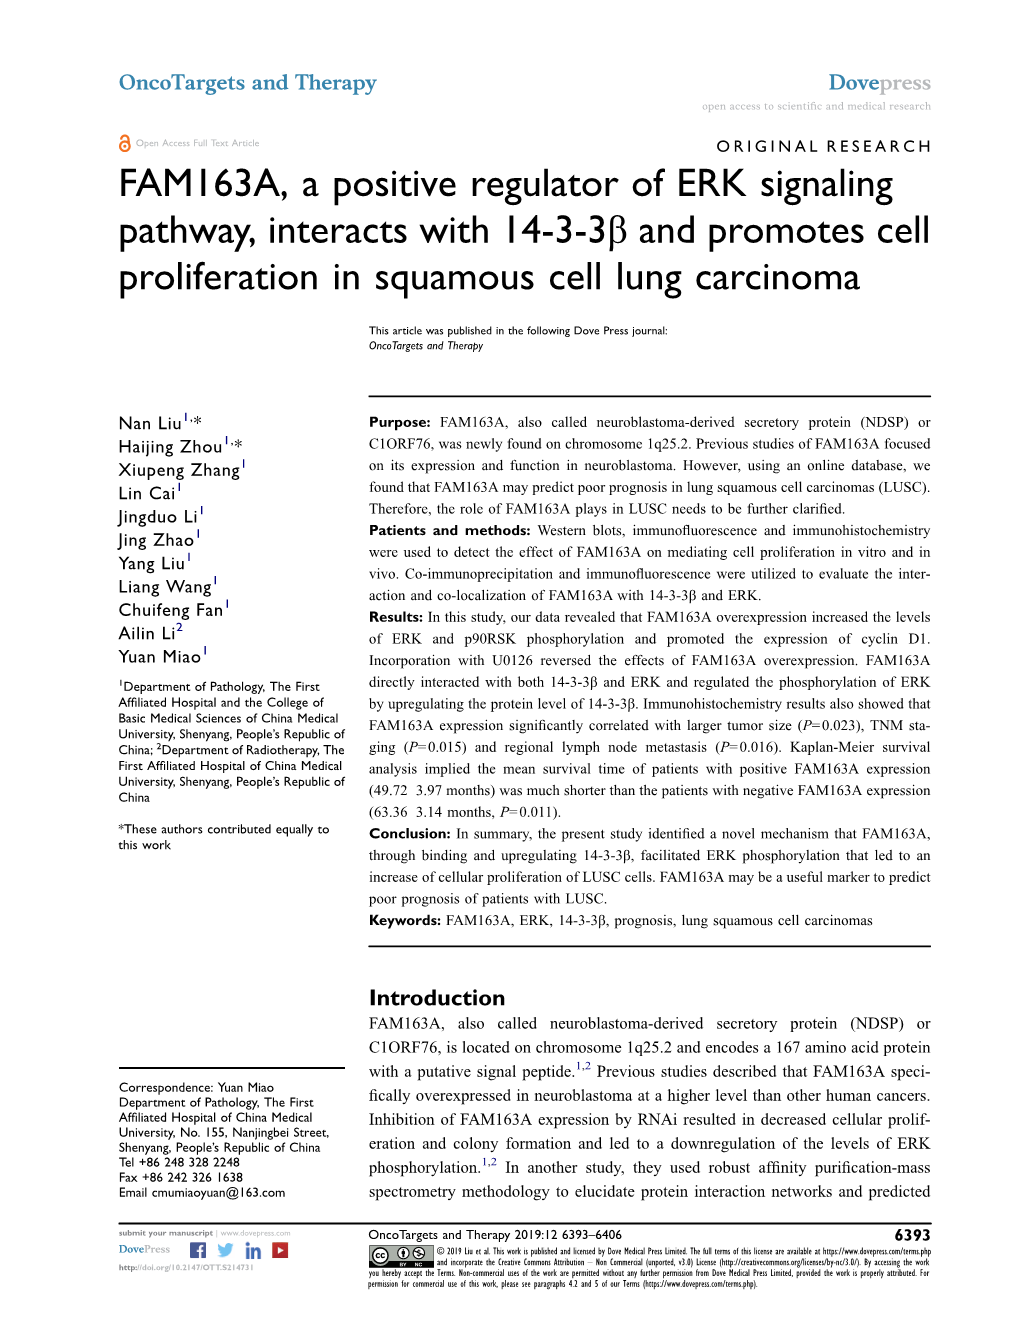 FAM163A, a Positive Regulator of ERK Signaling Pathway, Interacts with 14-3-3Β and Promotes Cell Proliferation in Squamous Cell Lung Carcinoma